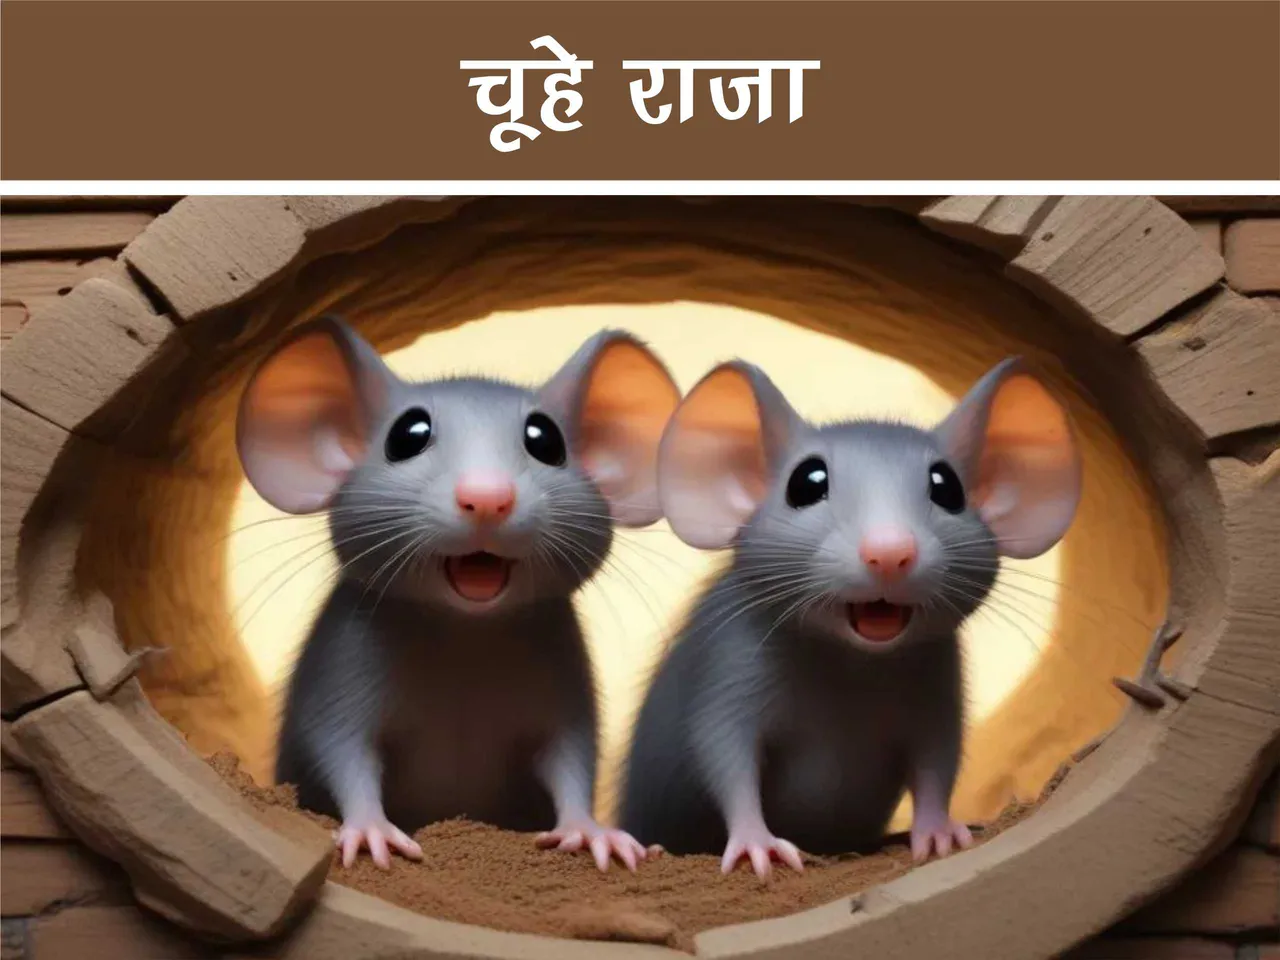 cartoon image of rats looking out from rat hole